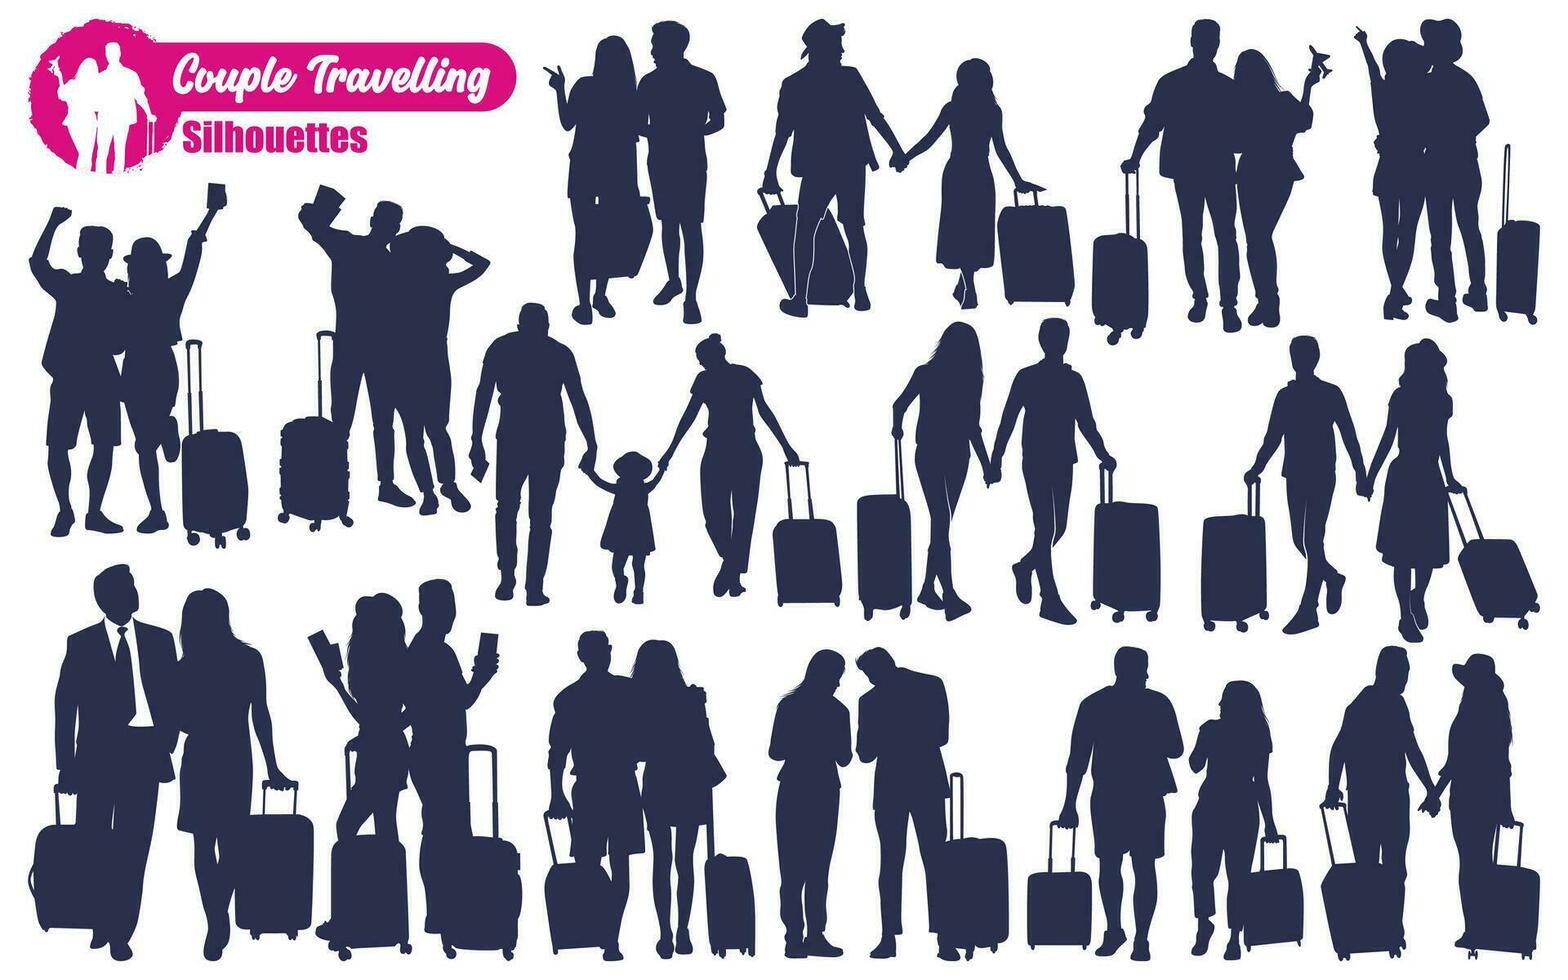 Black Couple Travelling Silhouettes vector